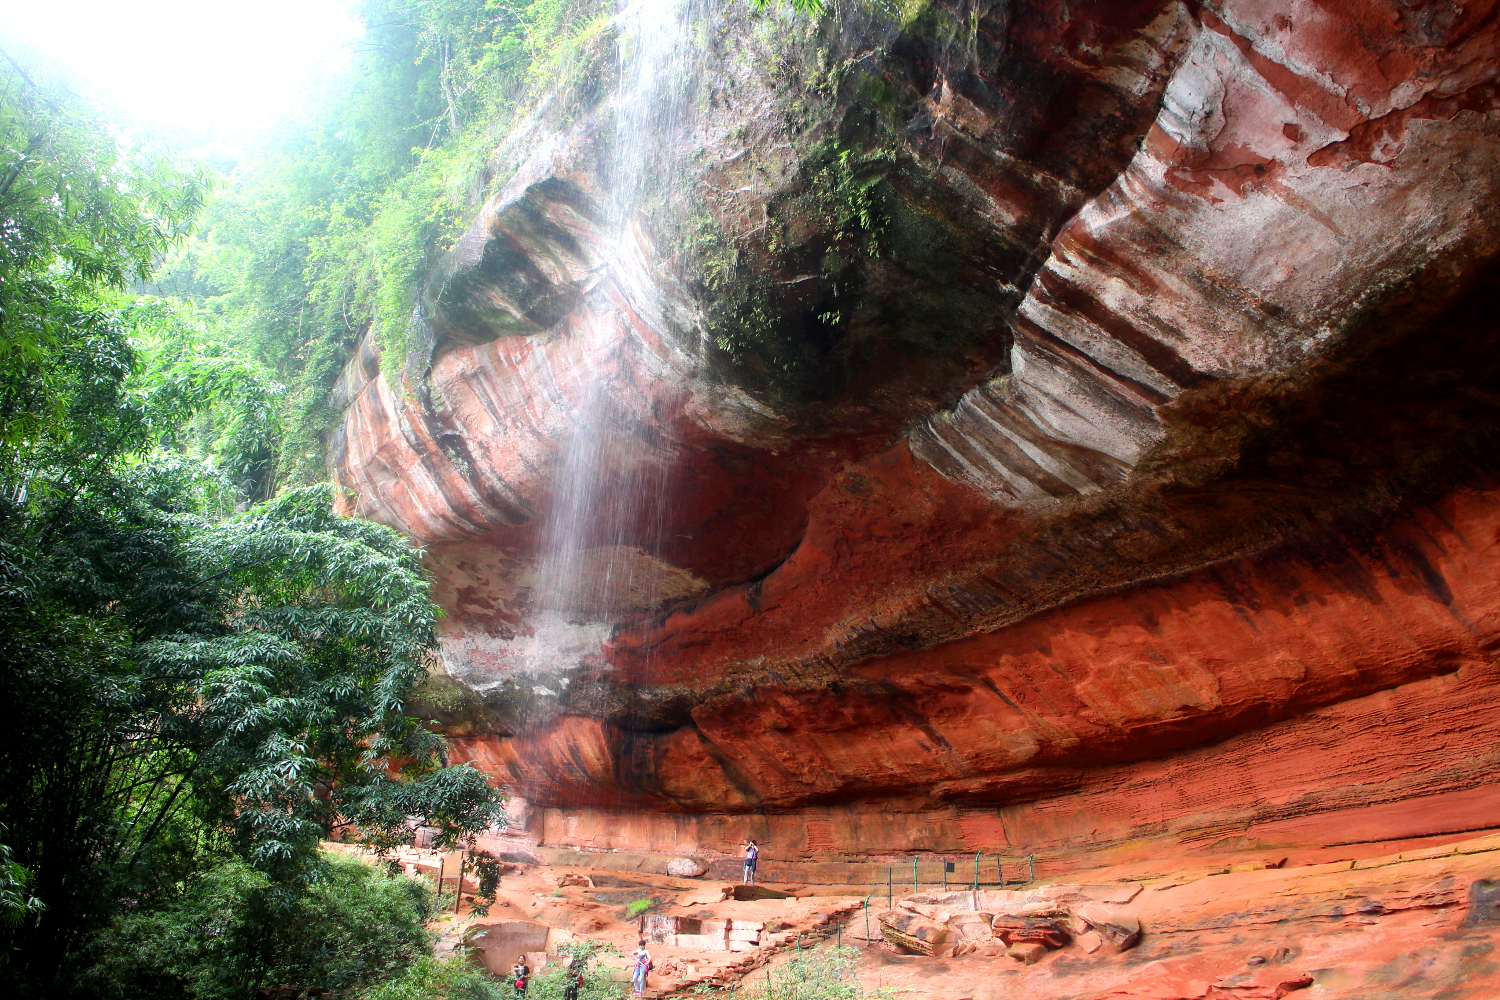 Red river runs through it: Chishui's iconic red clay waterfalls. Image by Thomas Bird / londoninfopage